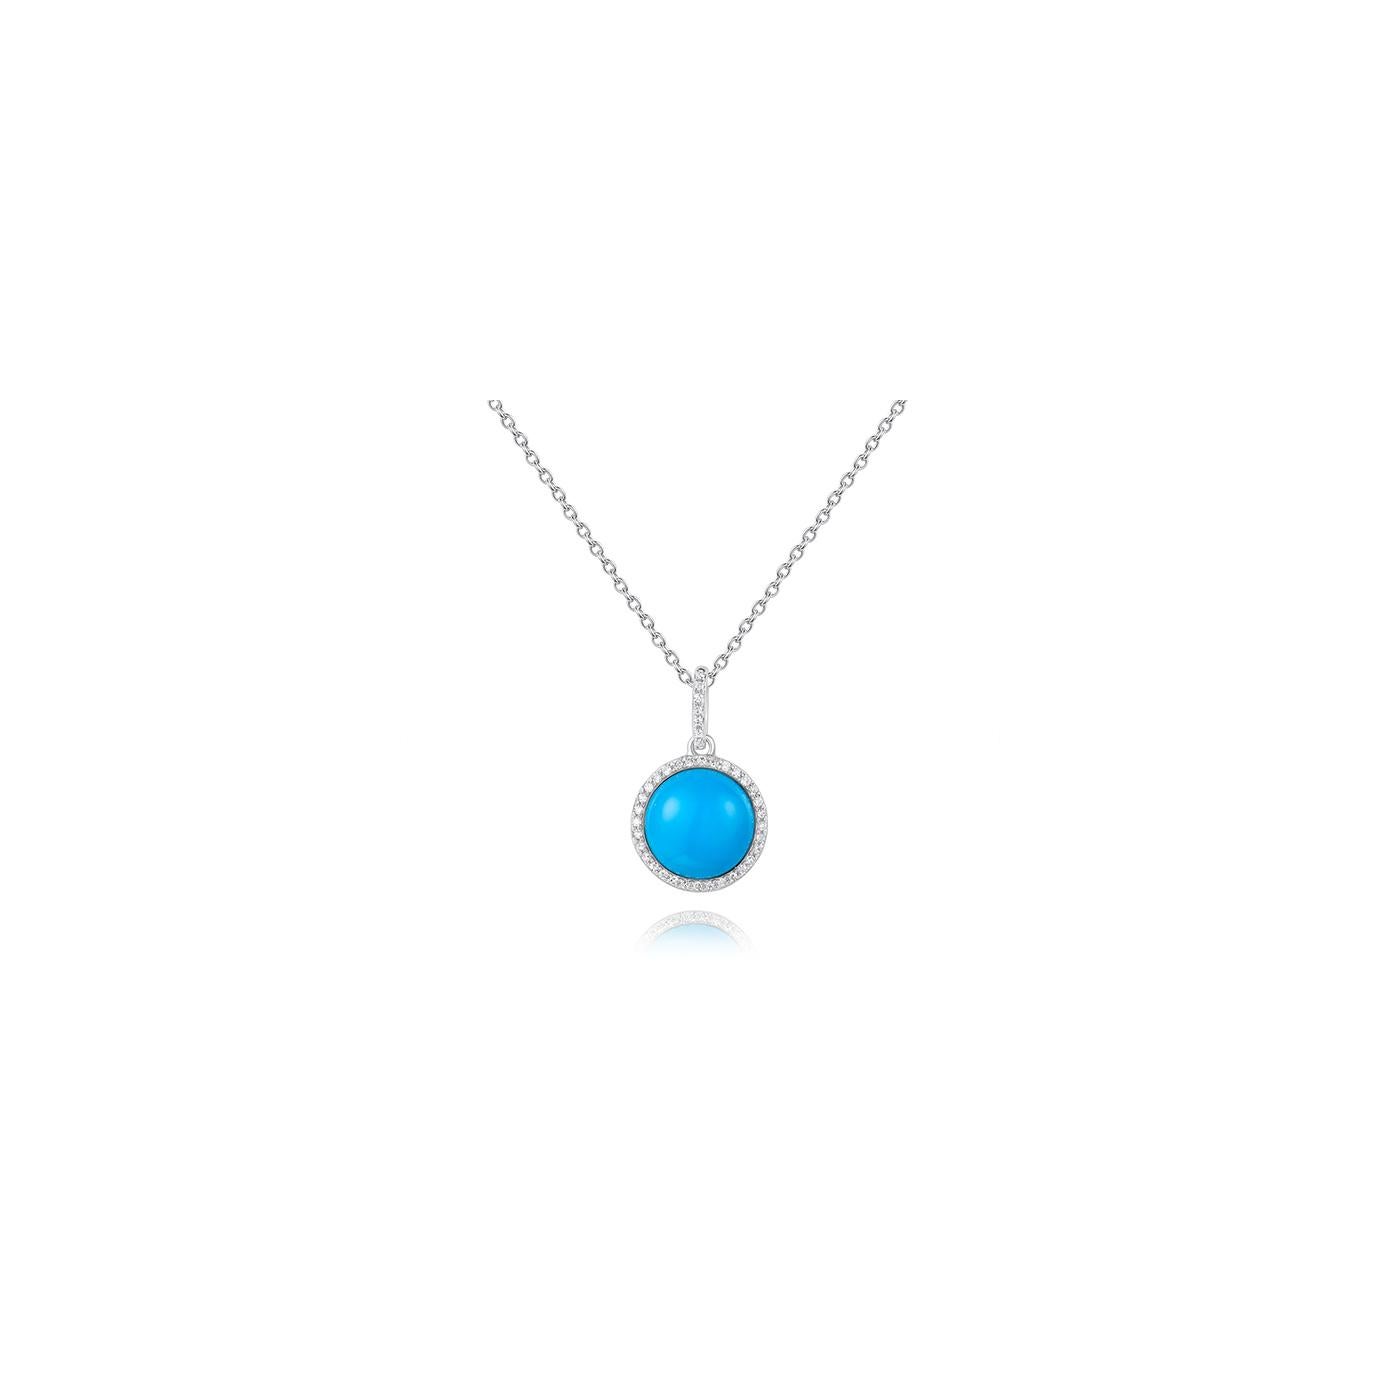 Round Cut 2.05 Carat Natural Turquoise and Diamond Necklace Pendant 14k White Gold